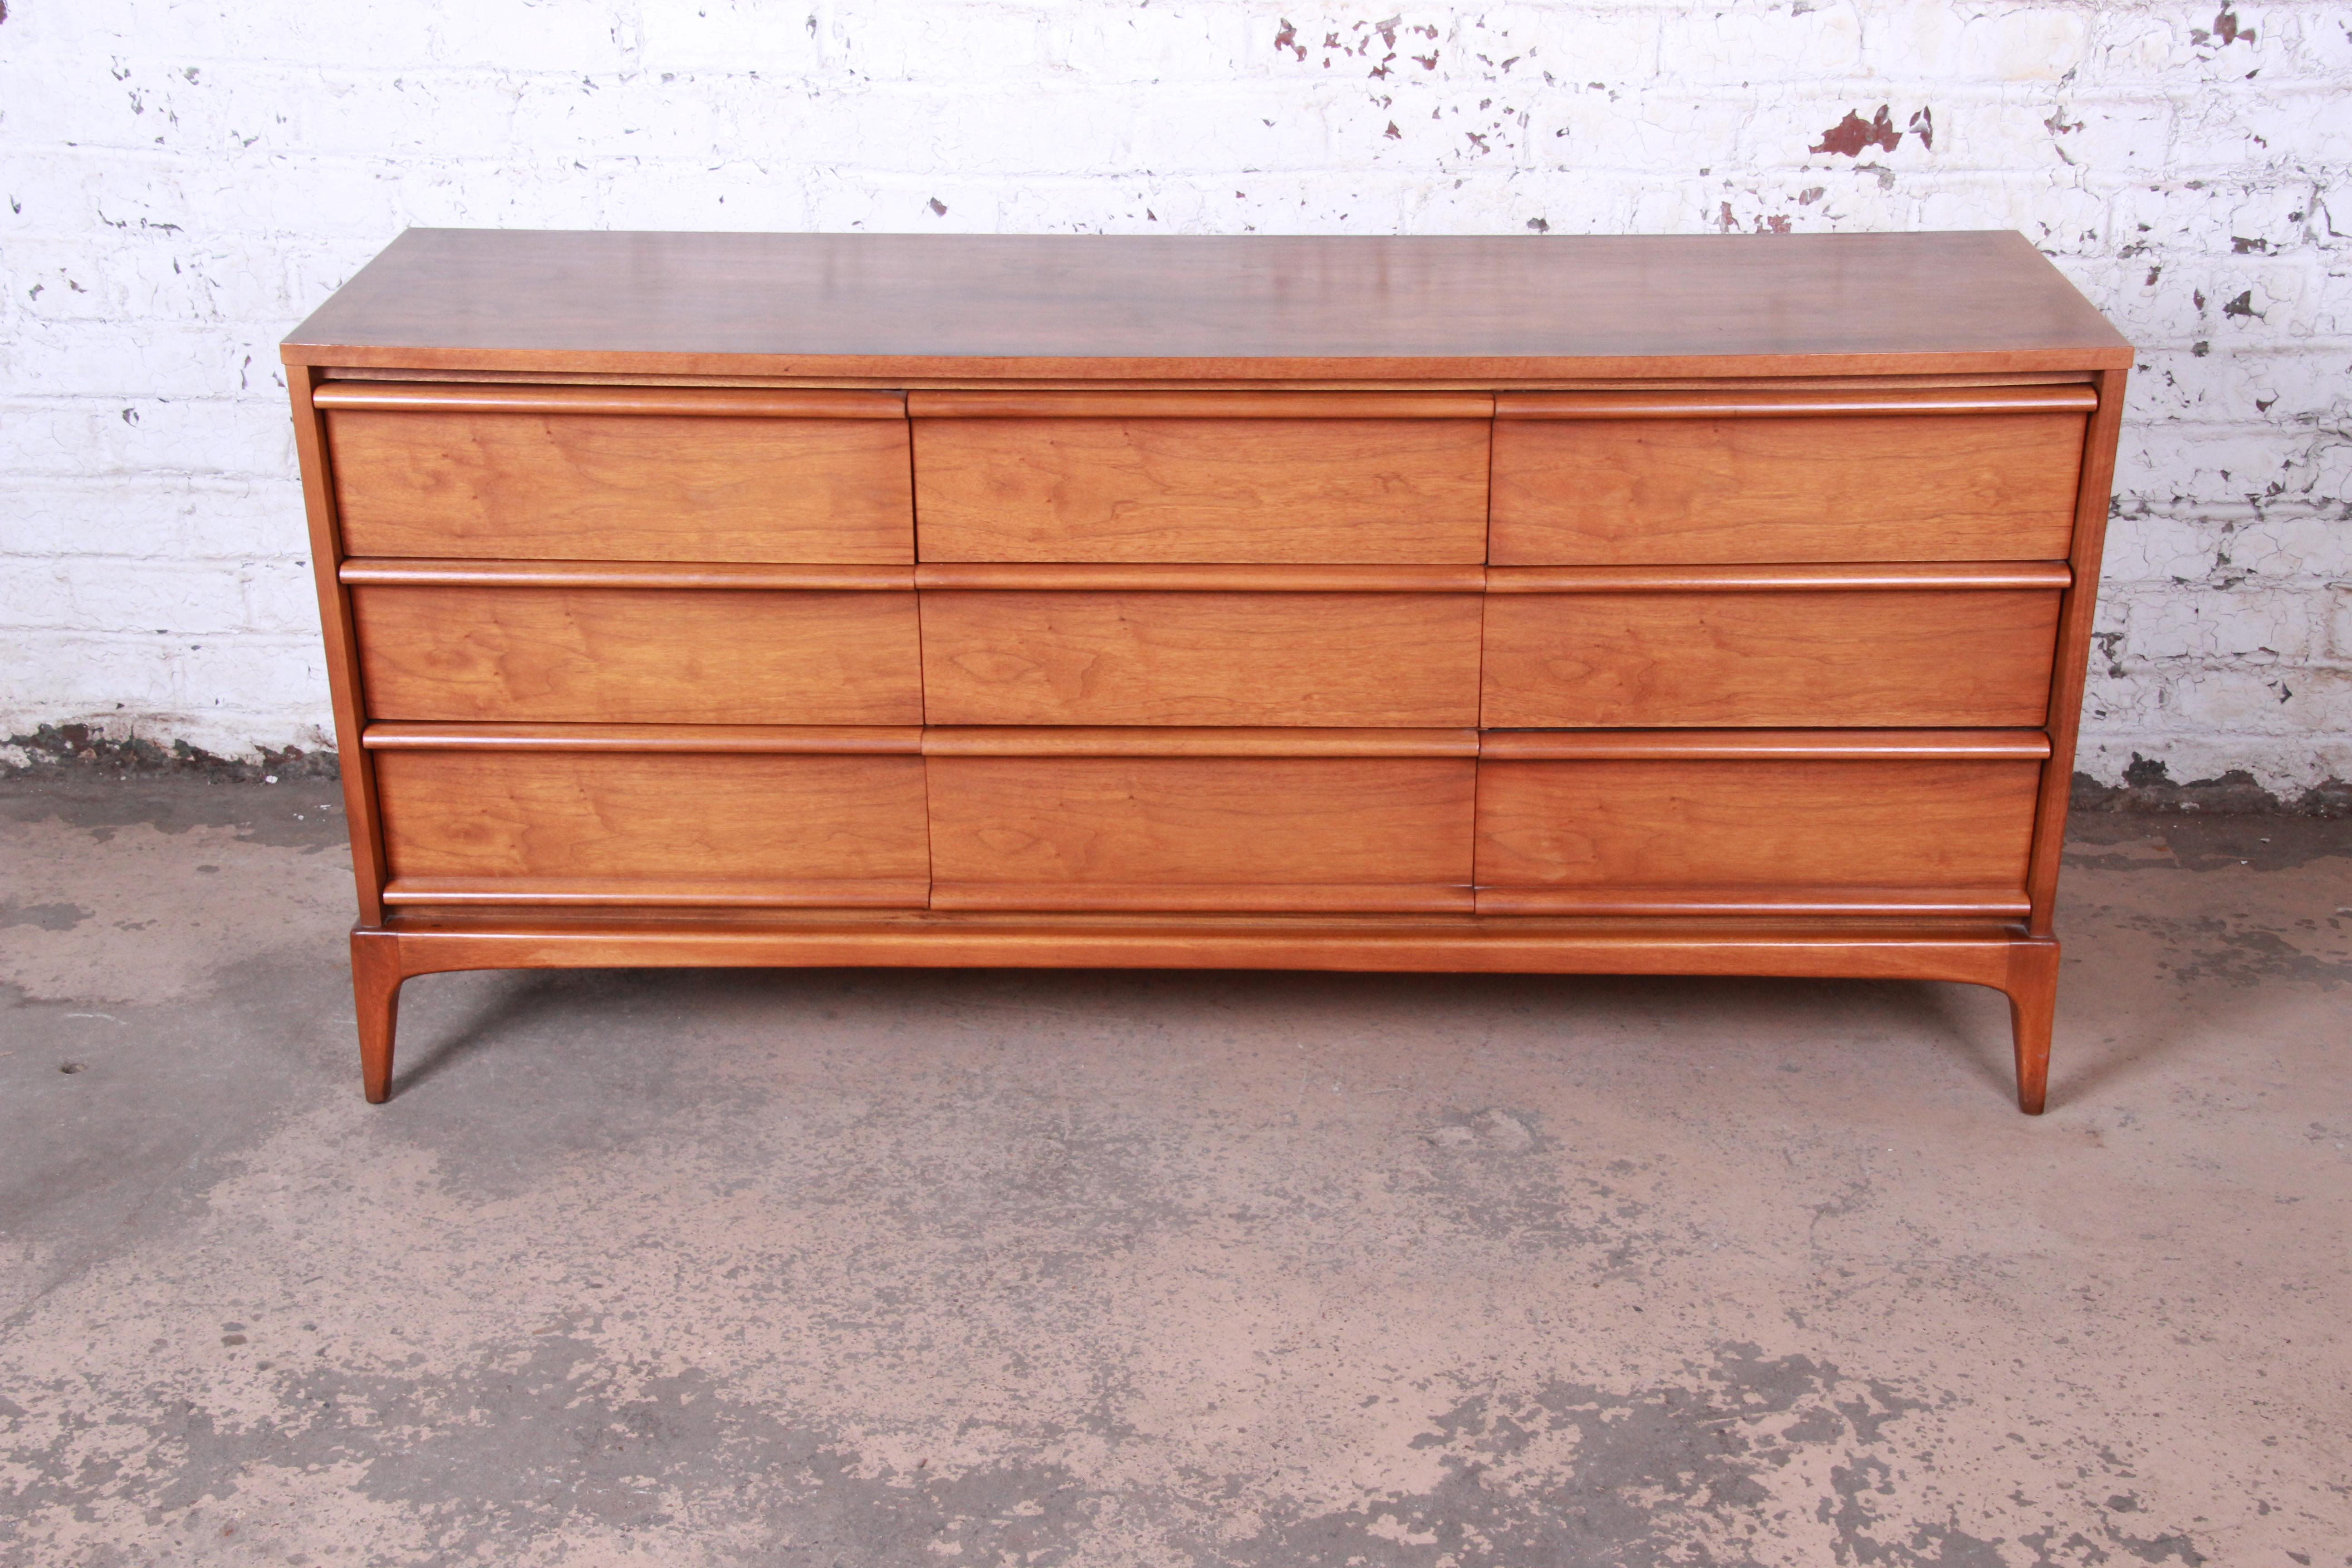 A gorgeous Mid-Century Modern walnut long dresser or credenza from the 